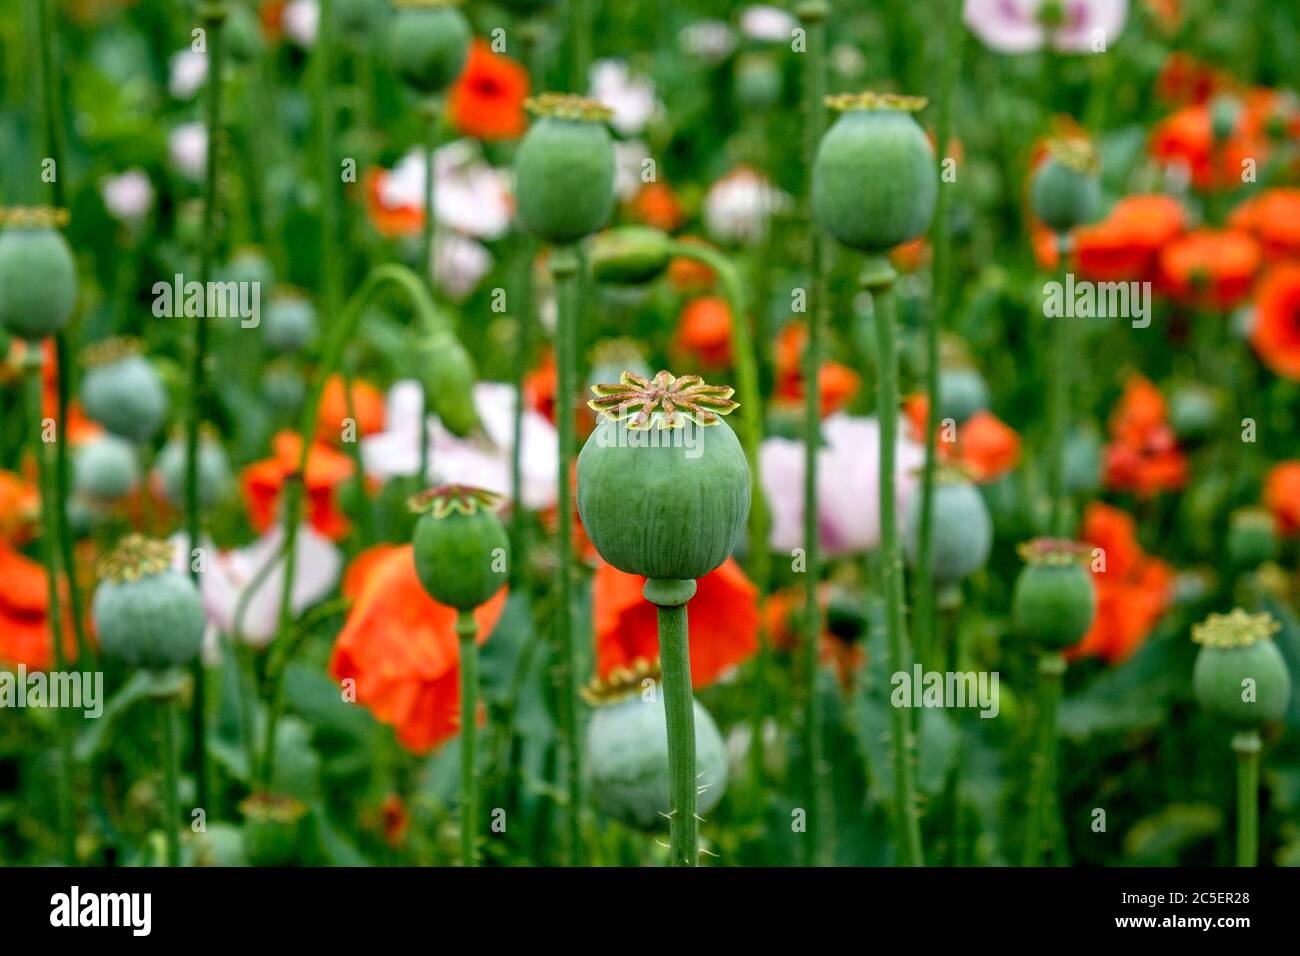 Commercial poppy crop poppy seed pods and flowers Stock Photo